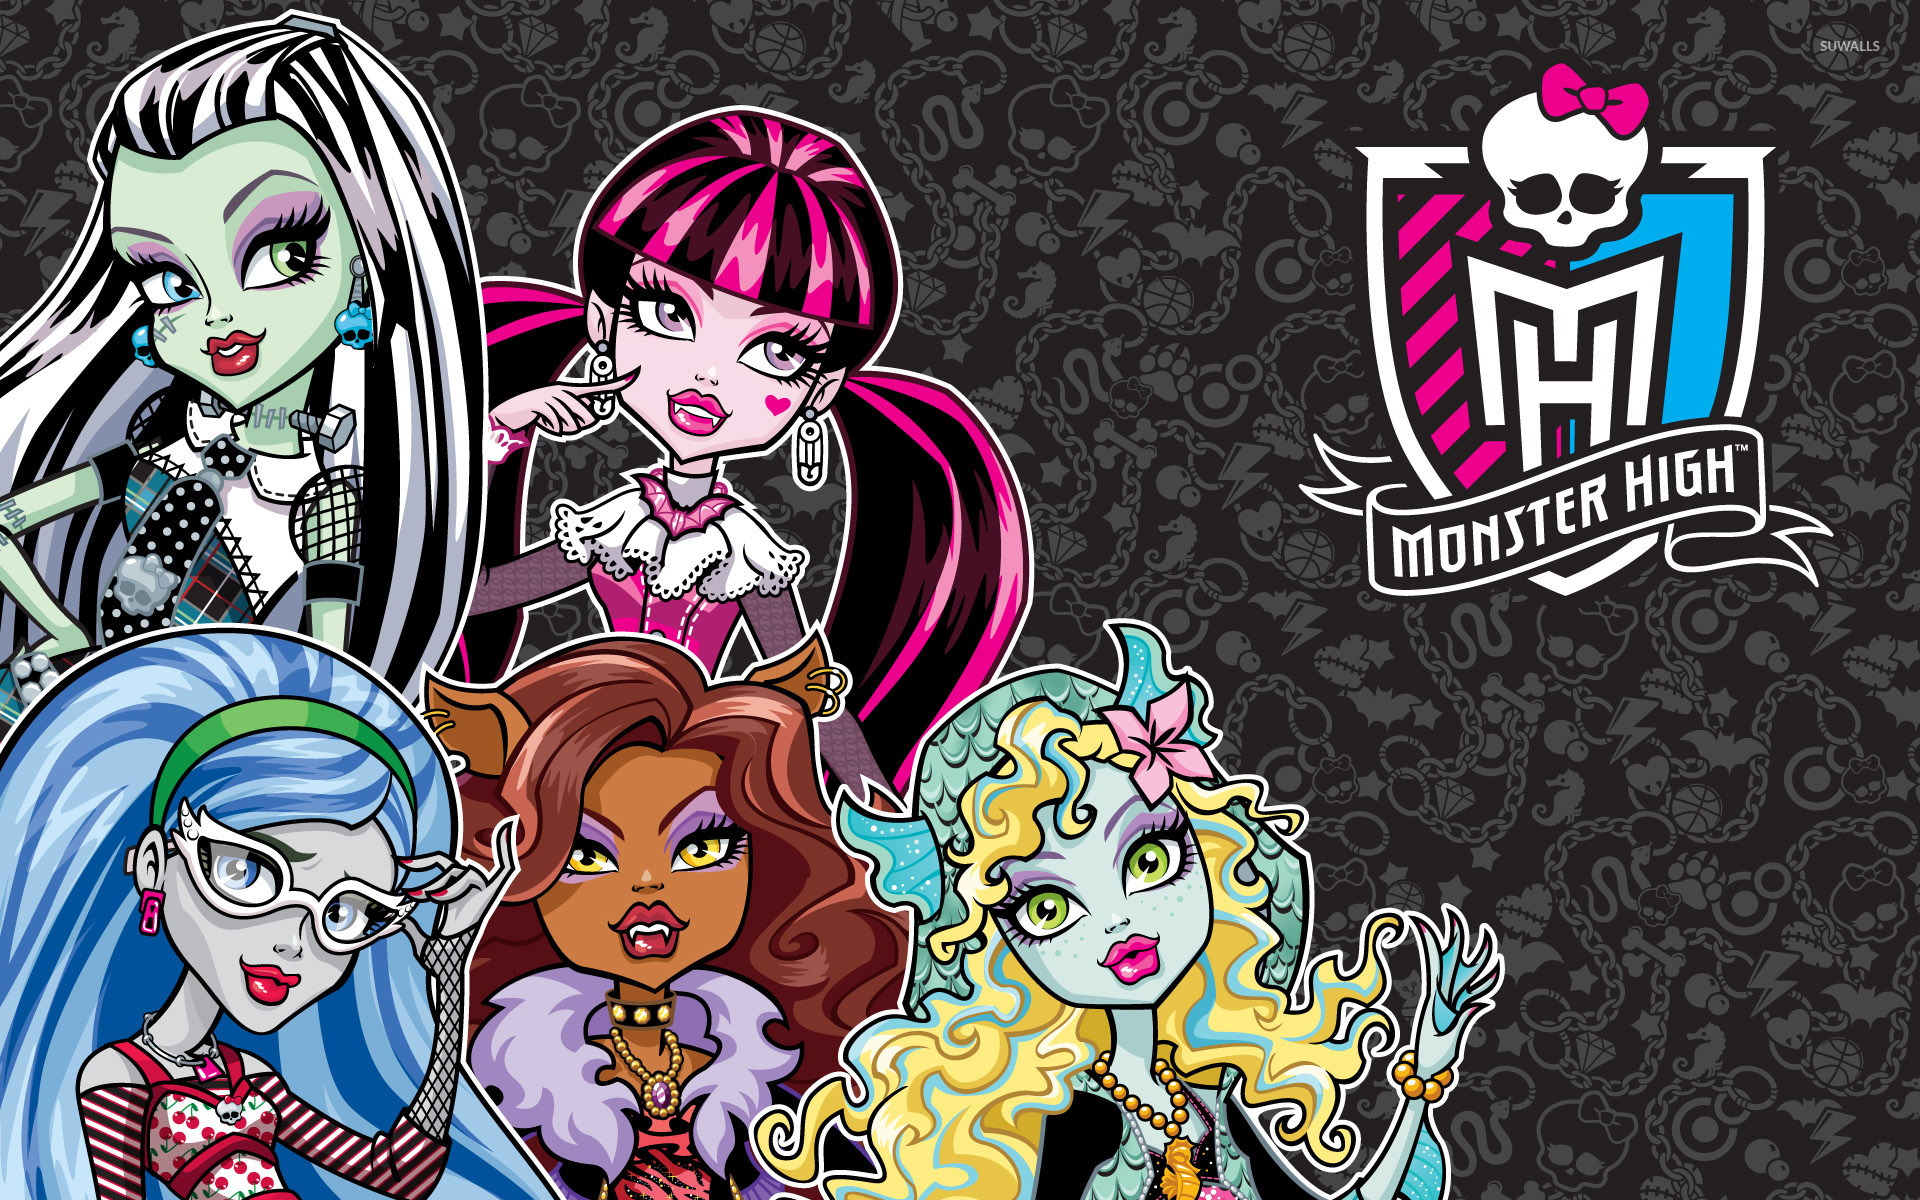 Monster High Images Mh Hd Wallpaper And Background  Monster High De  Draculaura Transparent PNG  900x1149  Free Download on NicePNG